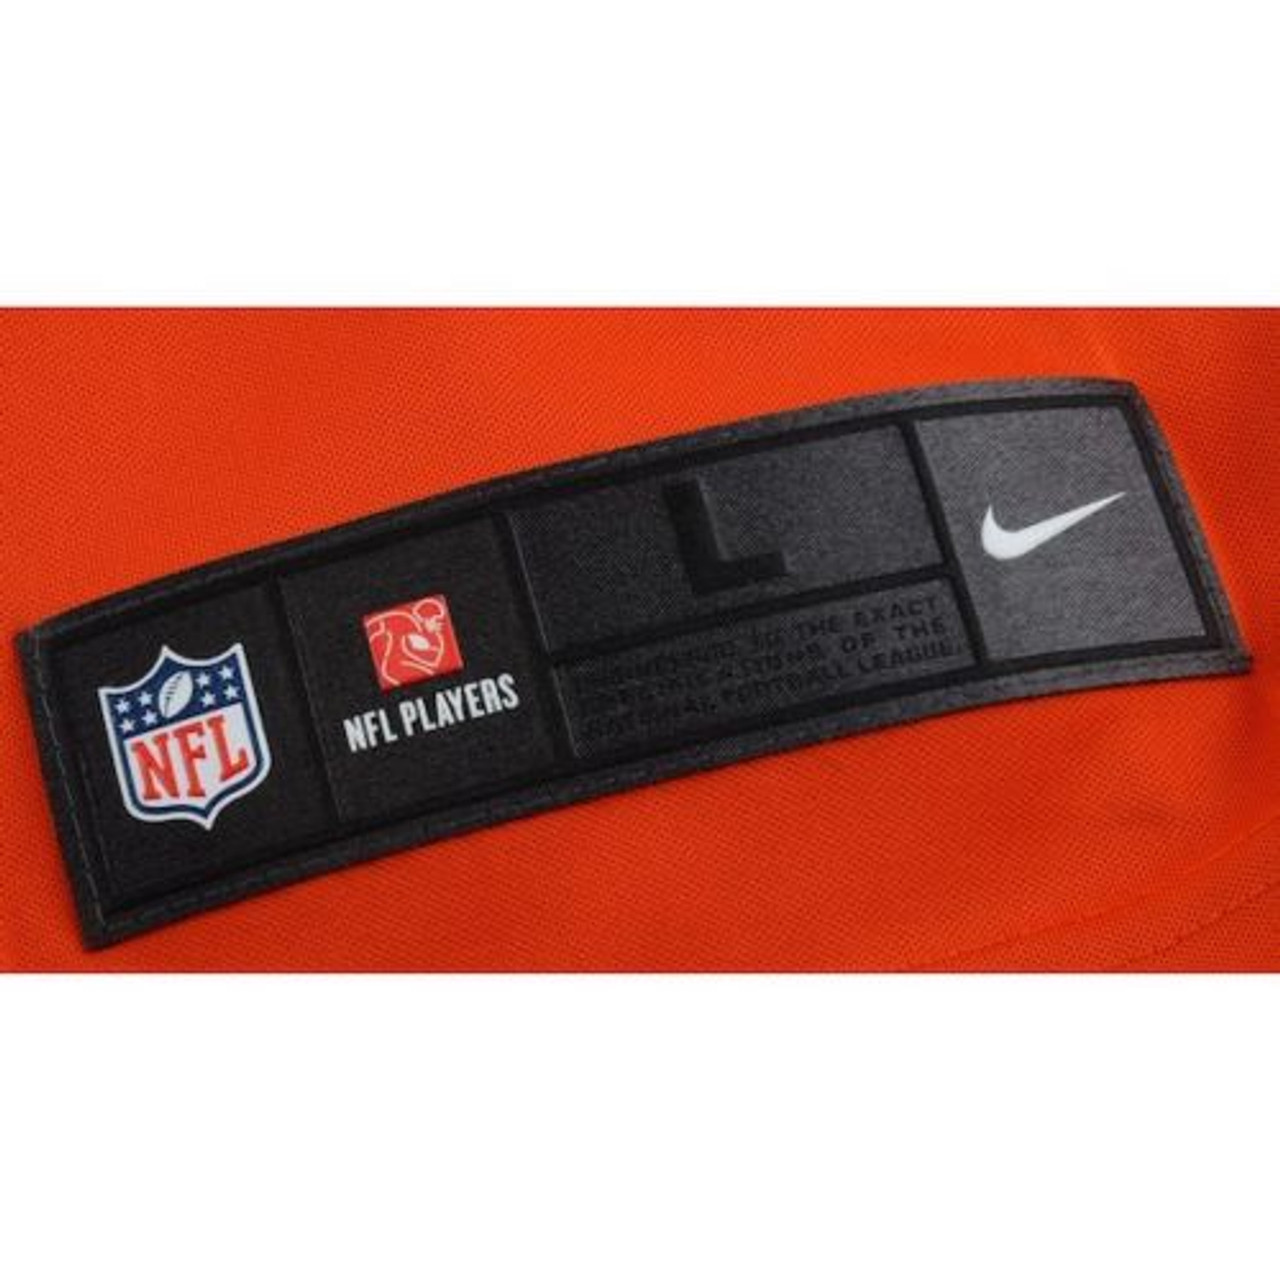 MITCHELL TRUBISKY Autographed Chicago Bears Orange Limited Nike Jersey  FANATICS - Game Day Legends